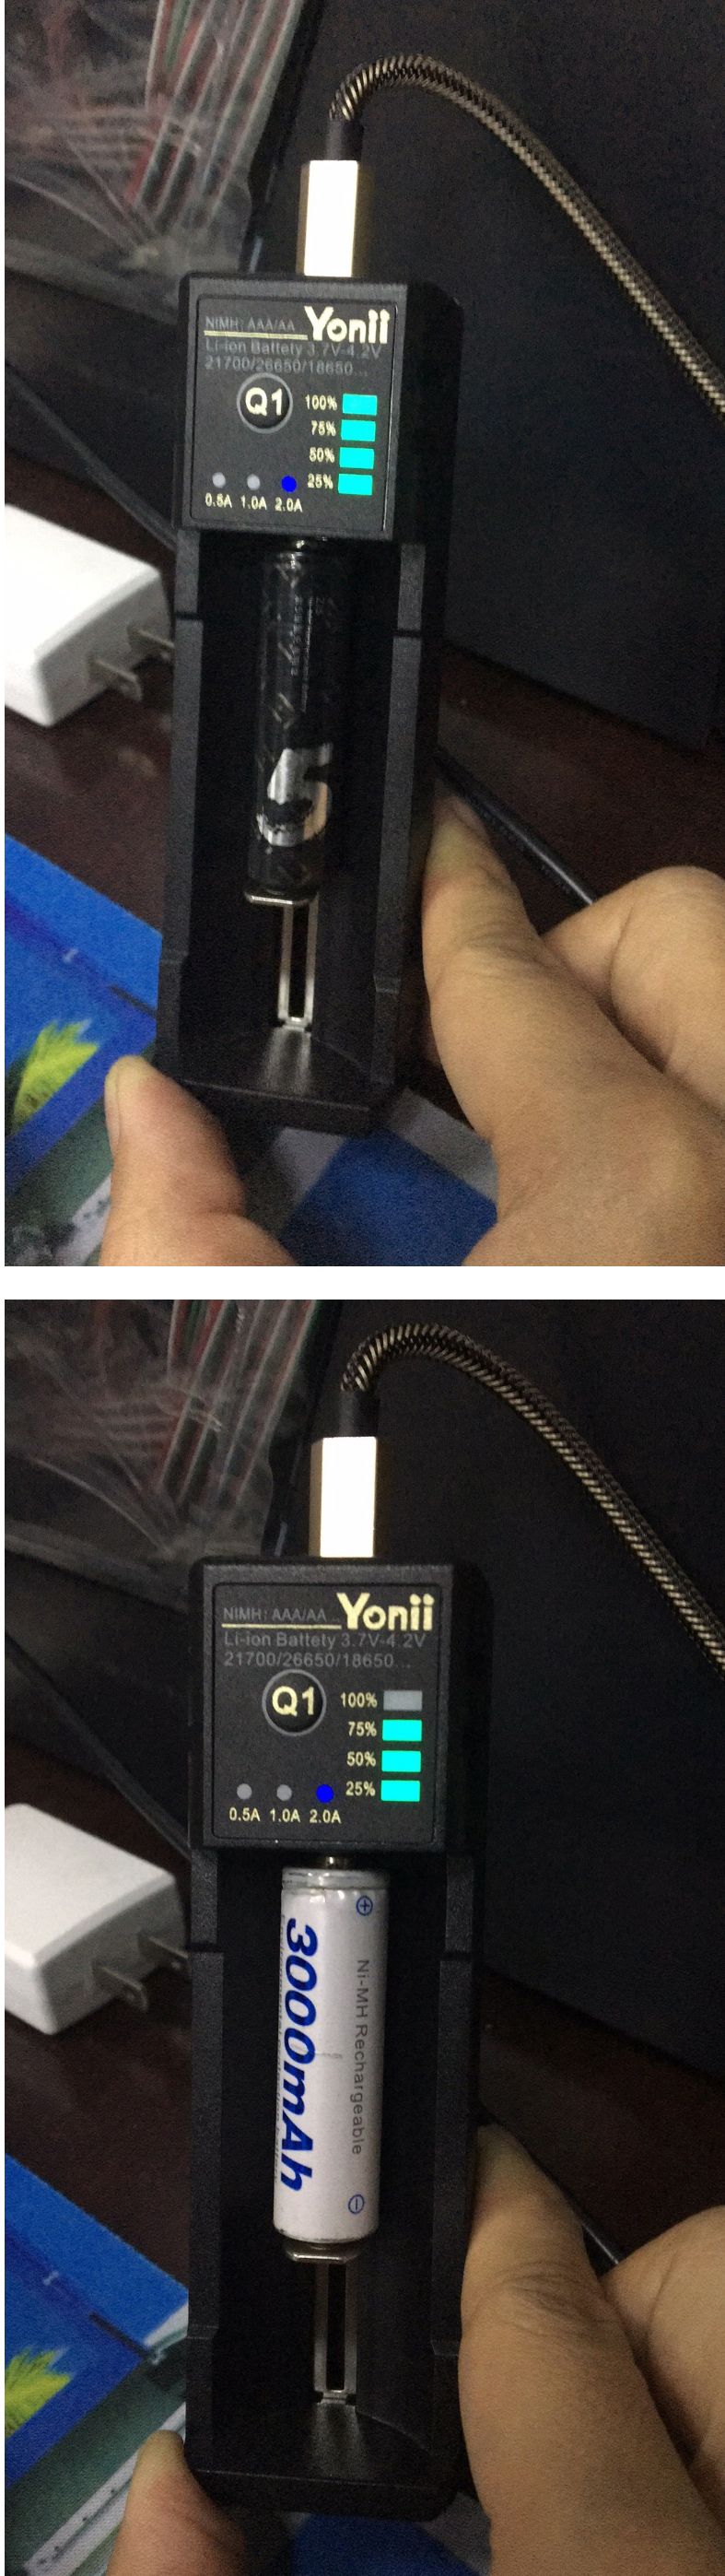 Yonii-Q1-Single-Slot-USB-Rechargeable-Lithium-Battery-Charger-Multi-functional-Intelligent-Charger-f-1551825